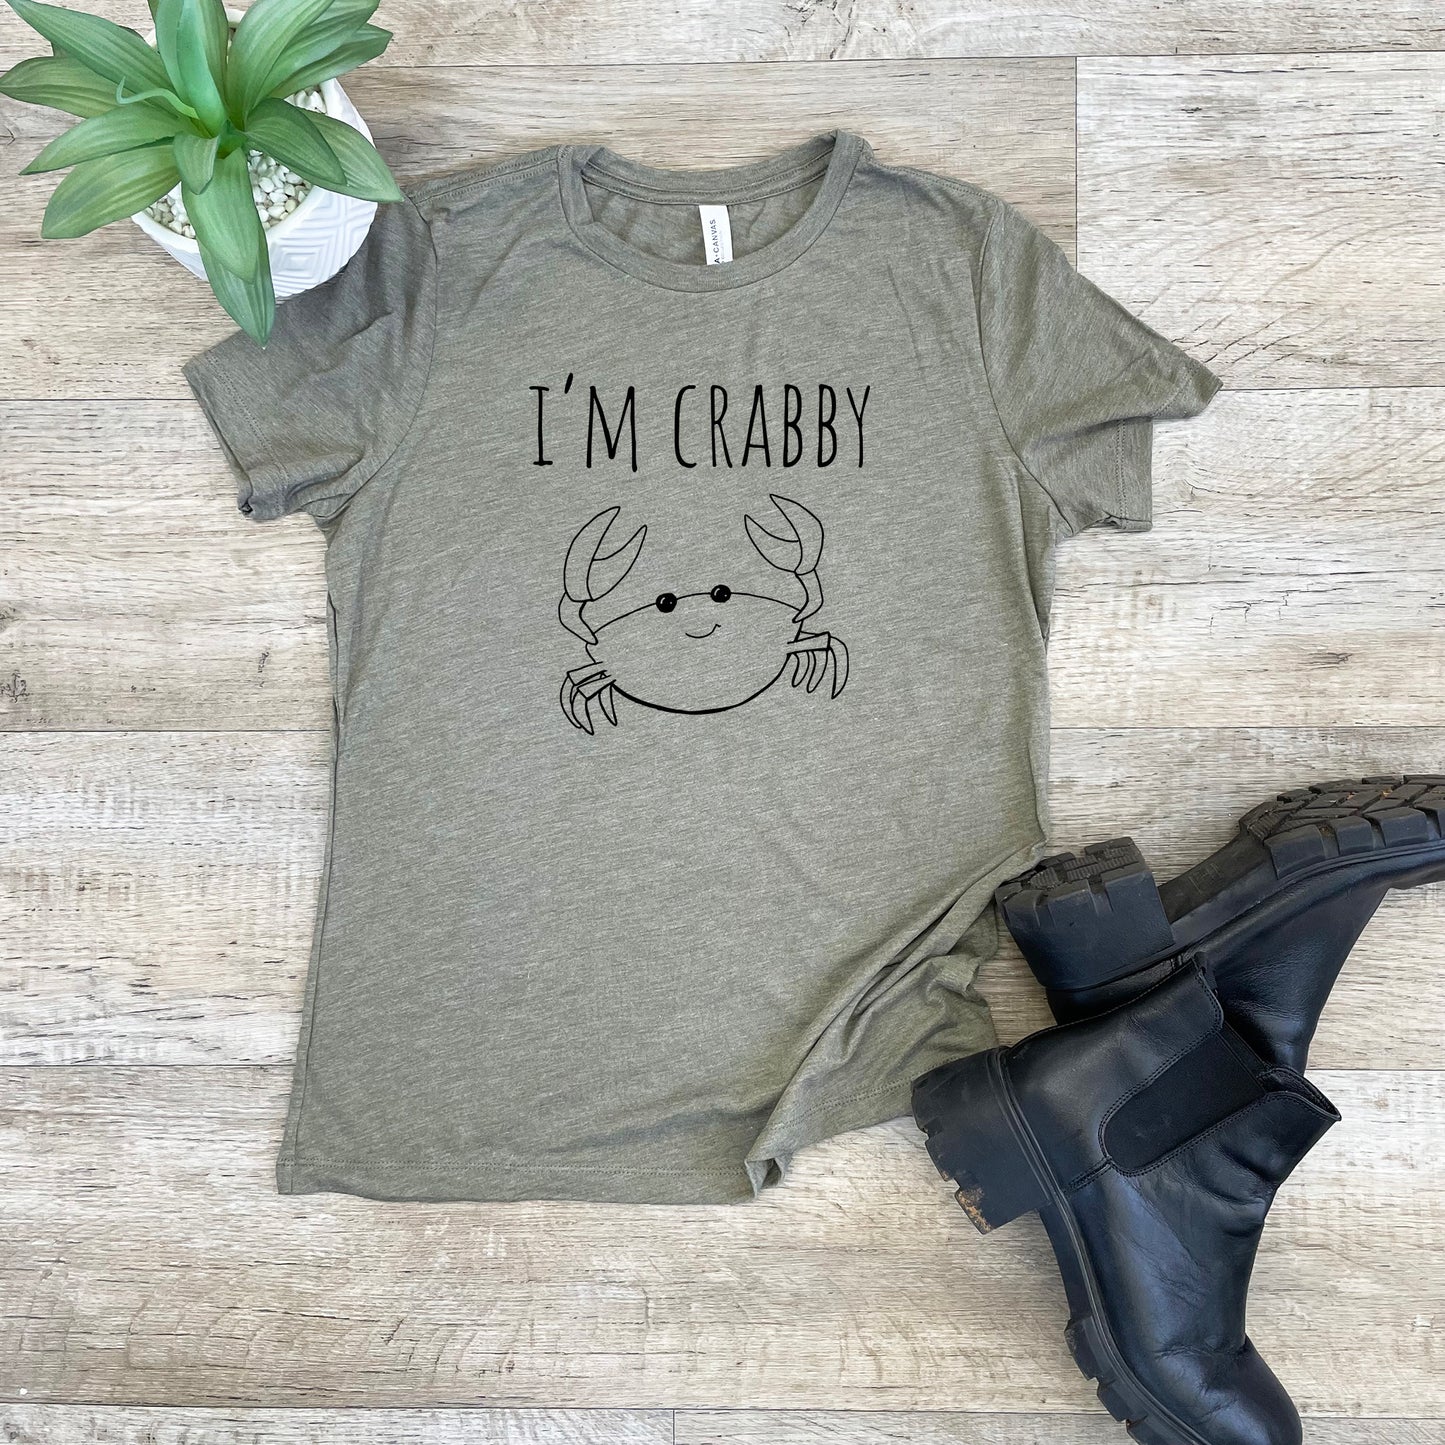 I'm Crabby - Women's Crew Tee - Olive or Dusty Blue